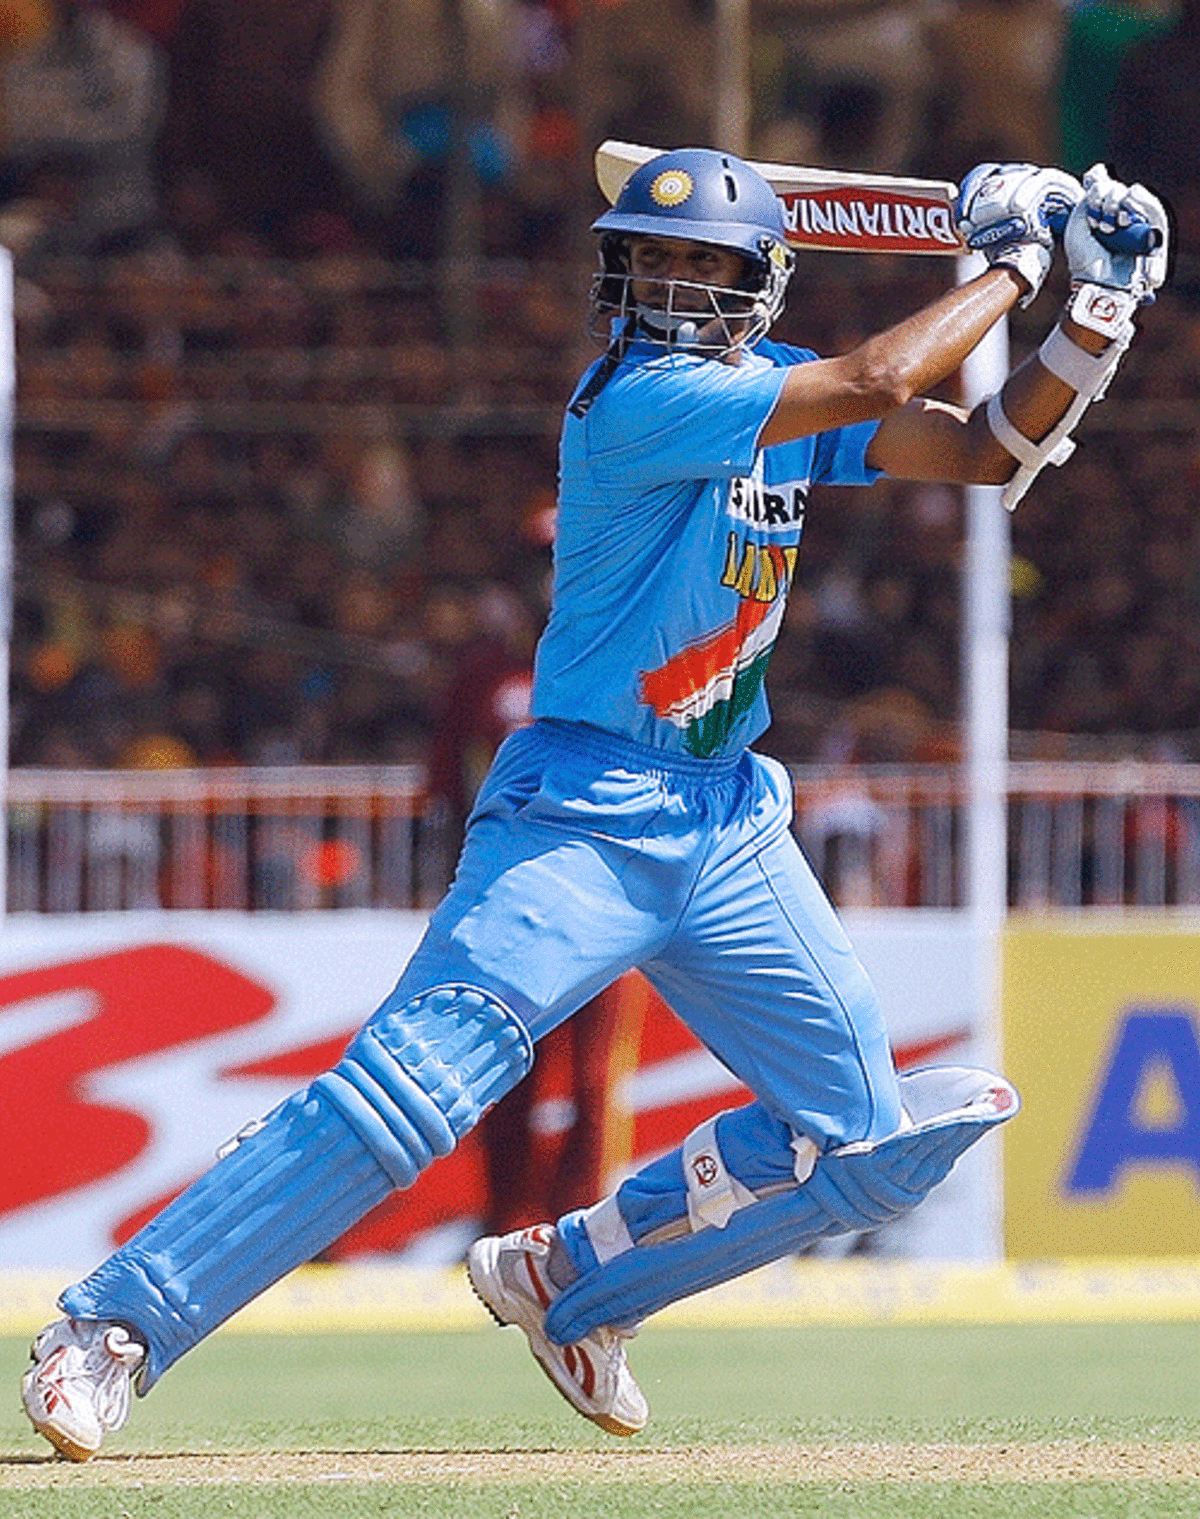 Rahul Dravid weighed in with 78, India v West Indies, 4th ODI, Vadodara, January 31, 2007